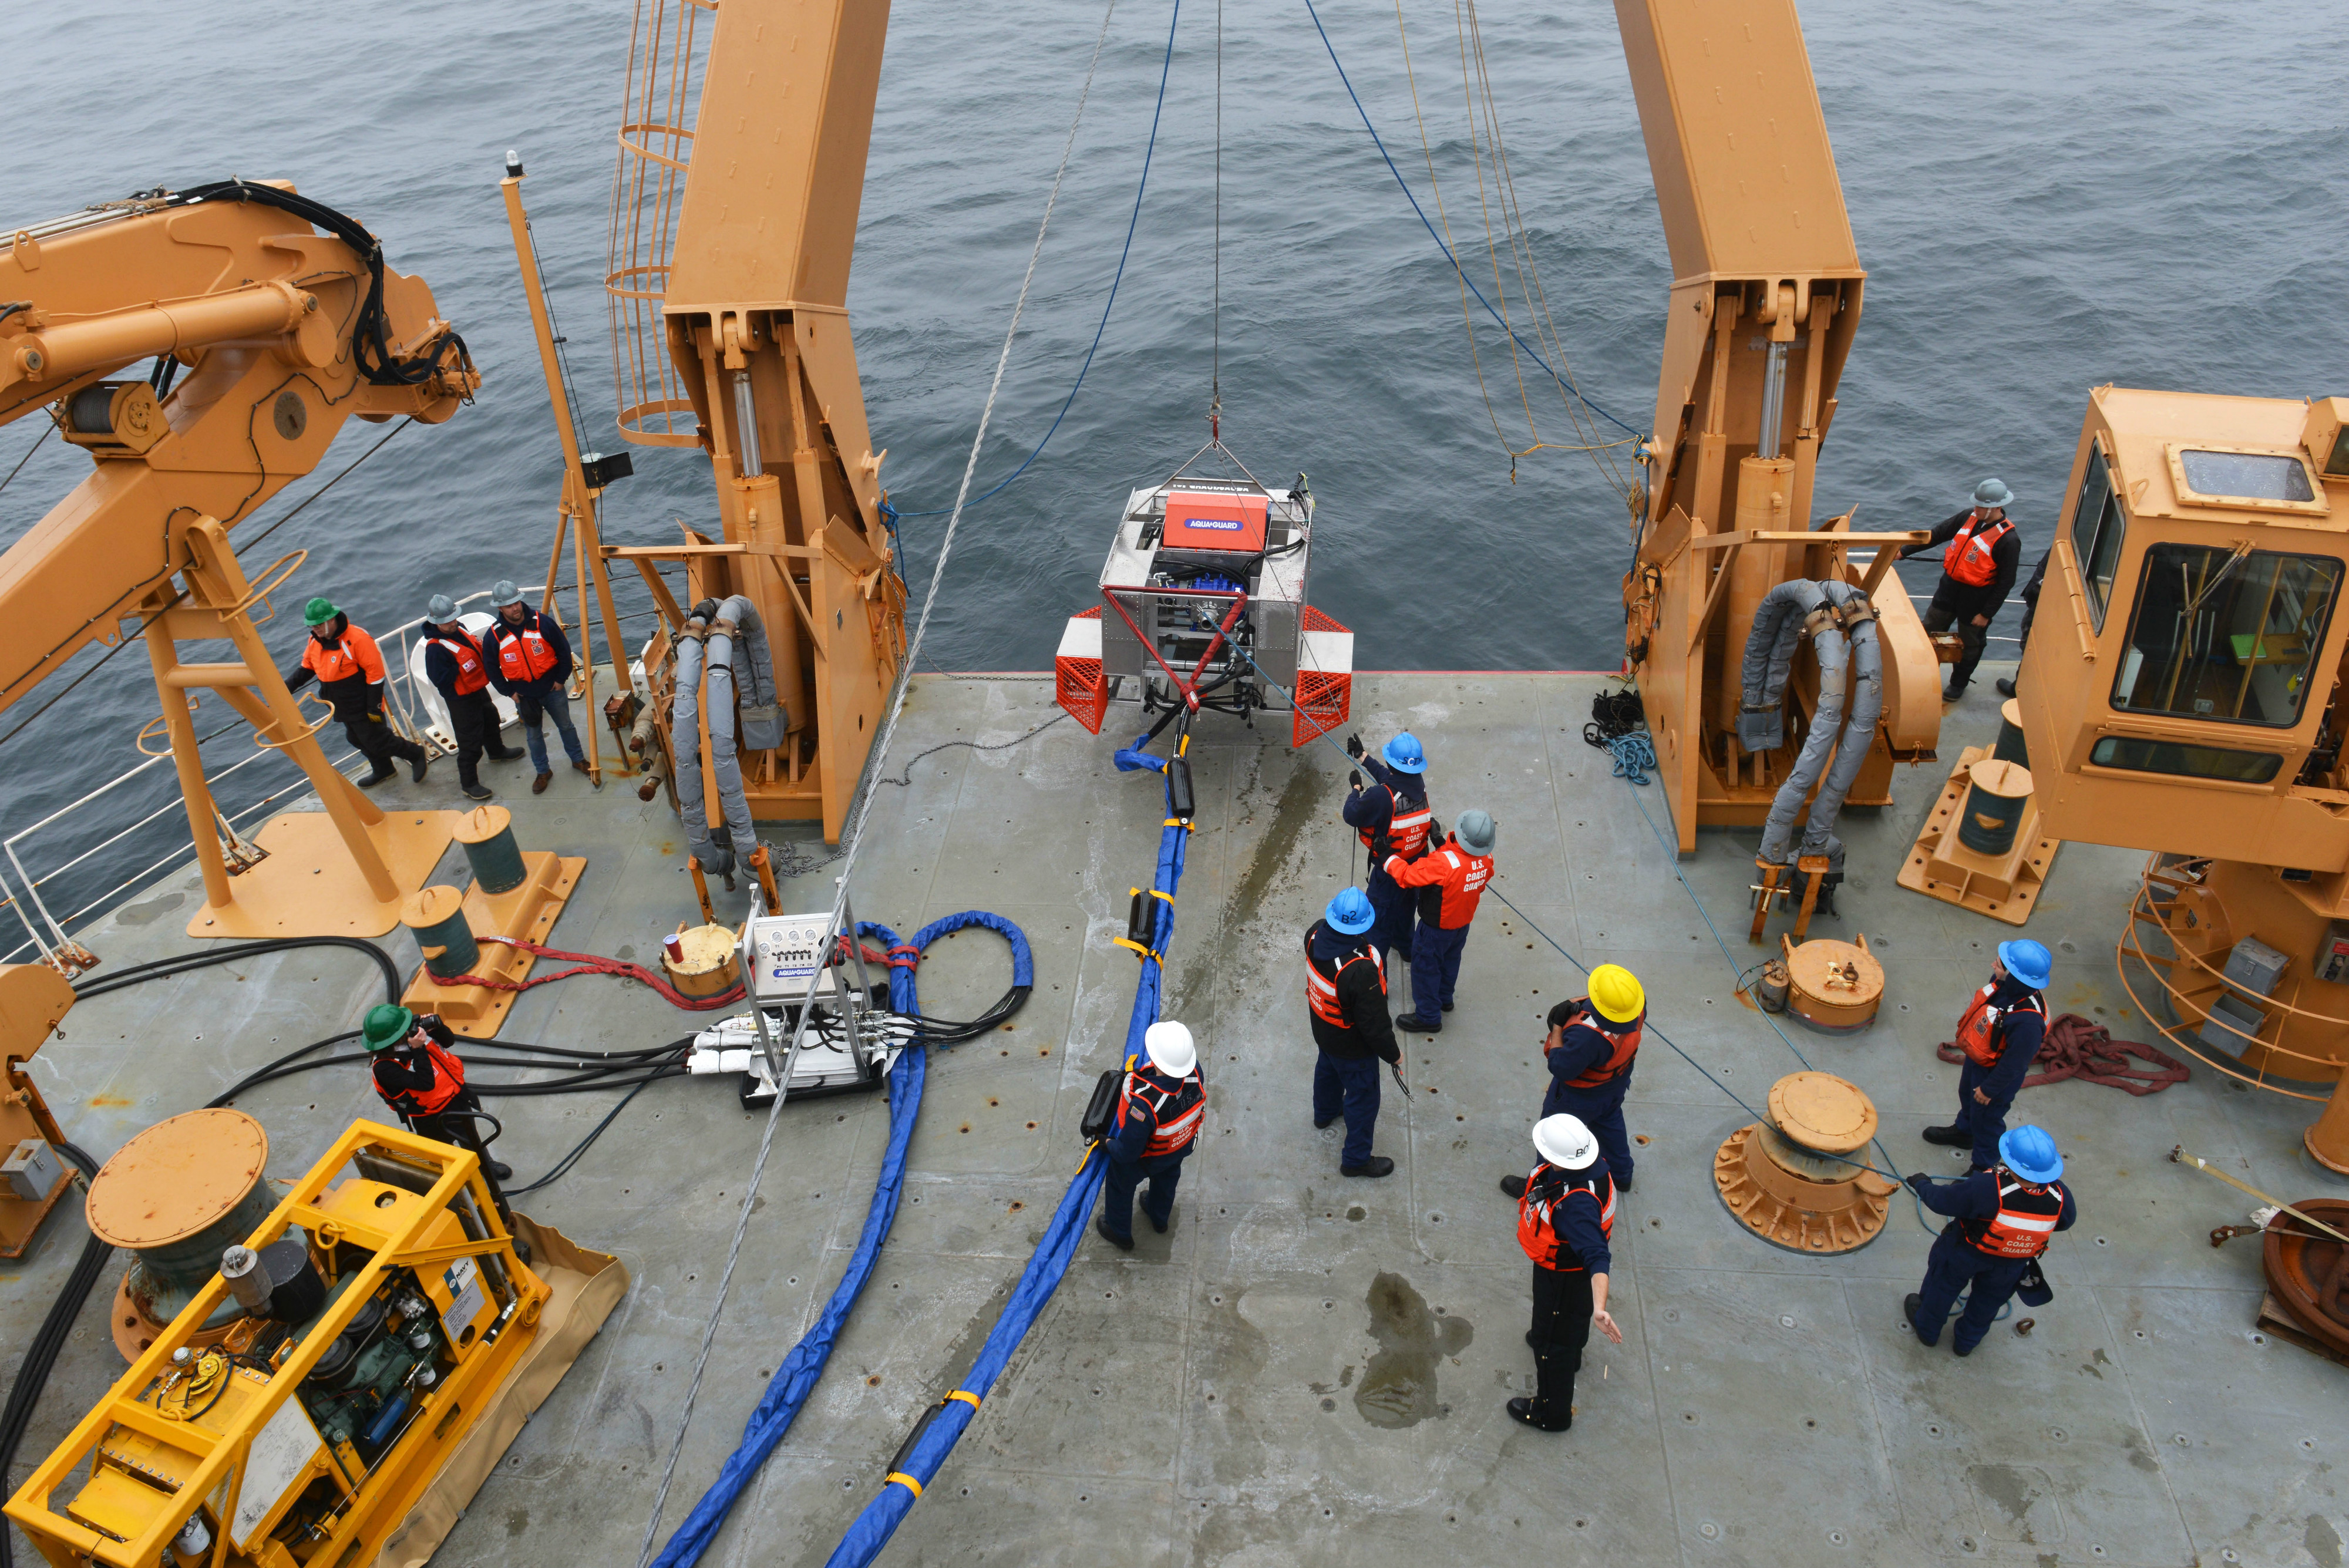 The RotoX oil skimmer is hoisted onto the Coast Guard Cutter Healy after a test in the Bering Sea northwest of St. George in July. (Senior Chief Petty Officer Rachel Polish / U.S. Coast Guard)